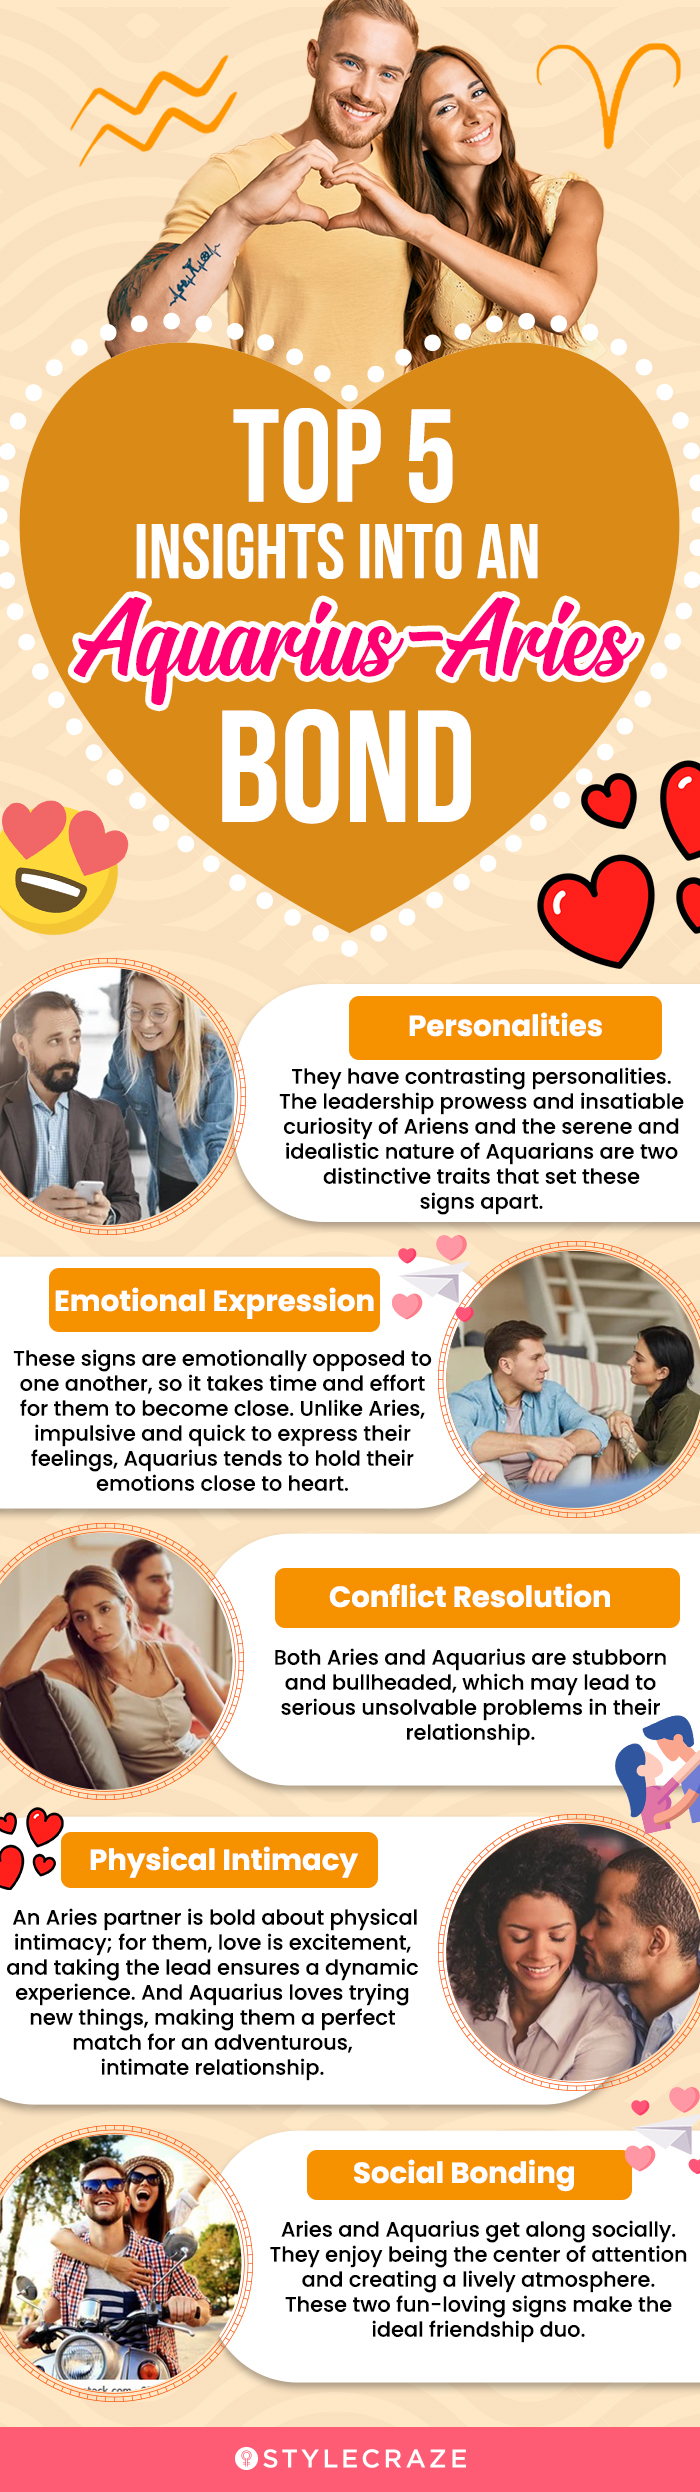 top 5 insights into an aquarius aries bond (infographic)